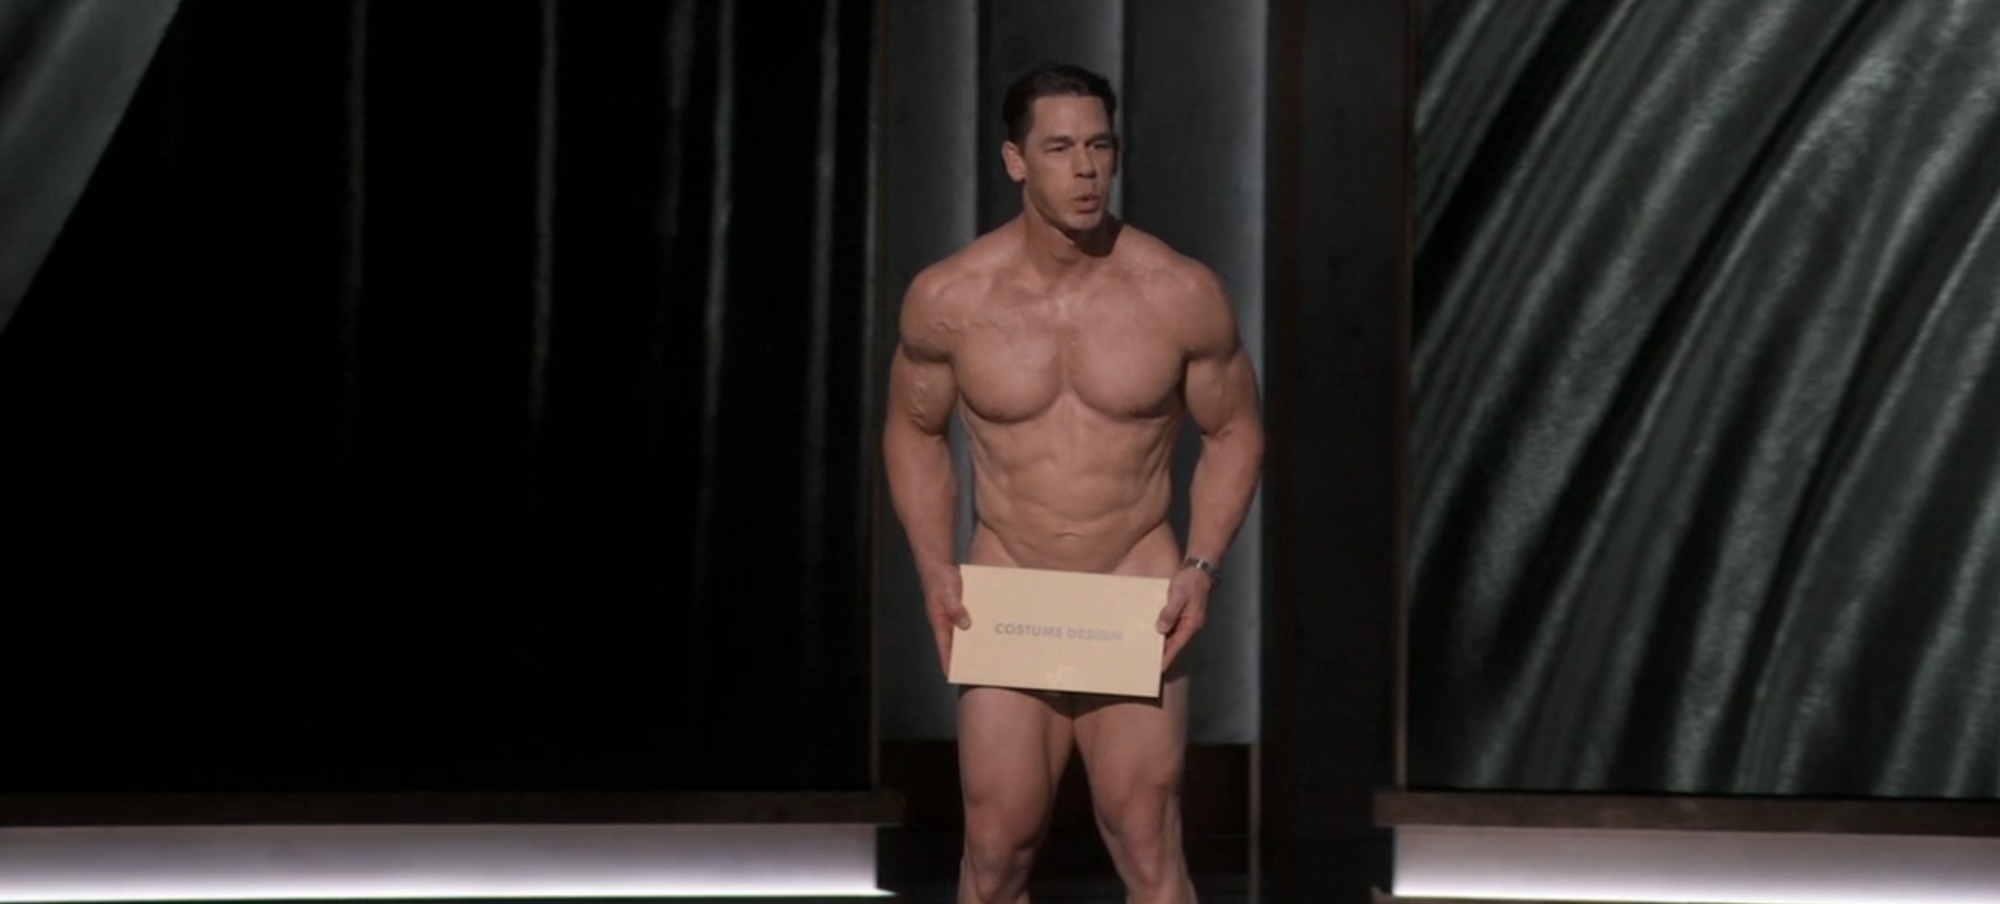 John Cena Just Walked Out on Stage Naked At The Oscars